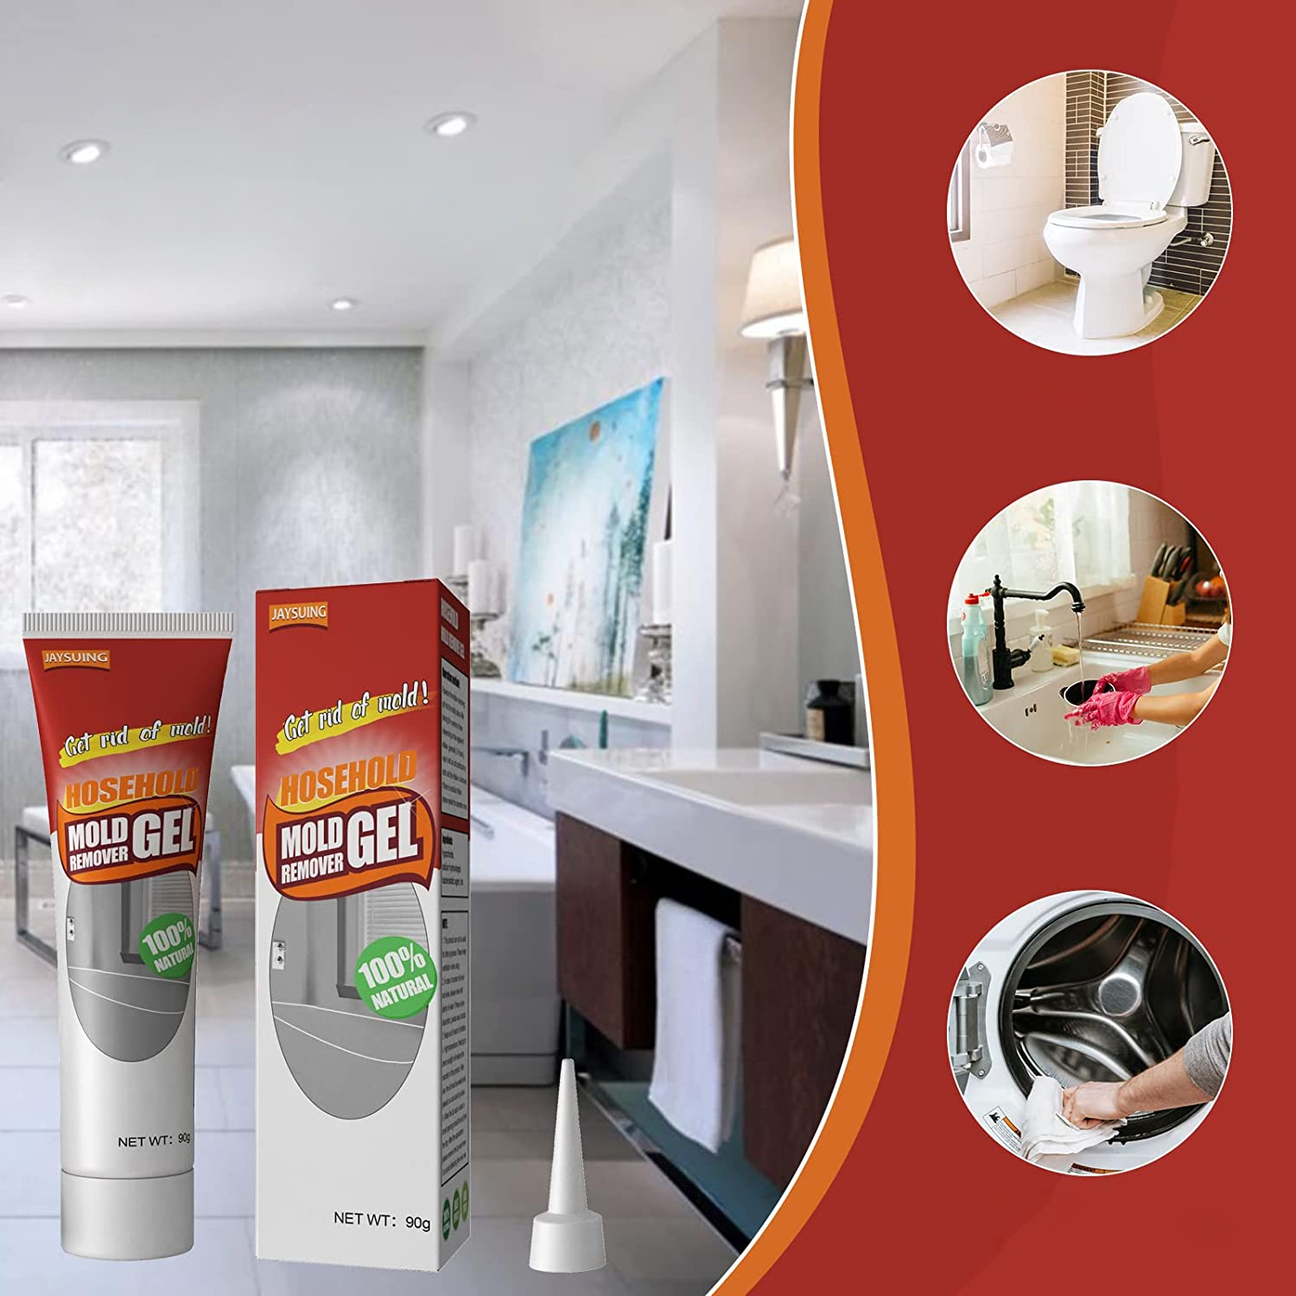 MildewGuard™ - Mould Remover Gel (1+1 FREE)